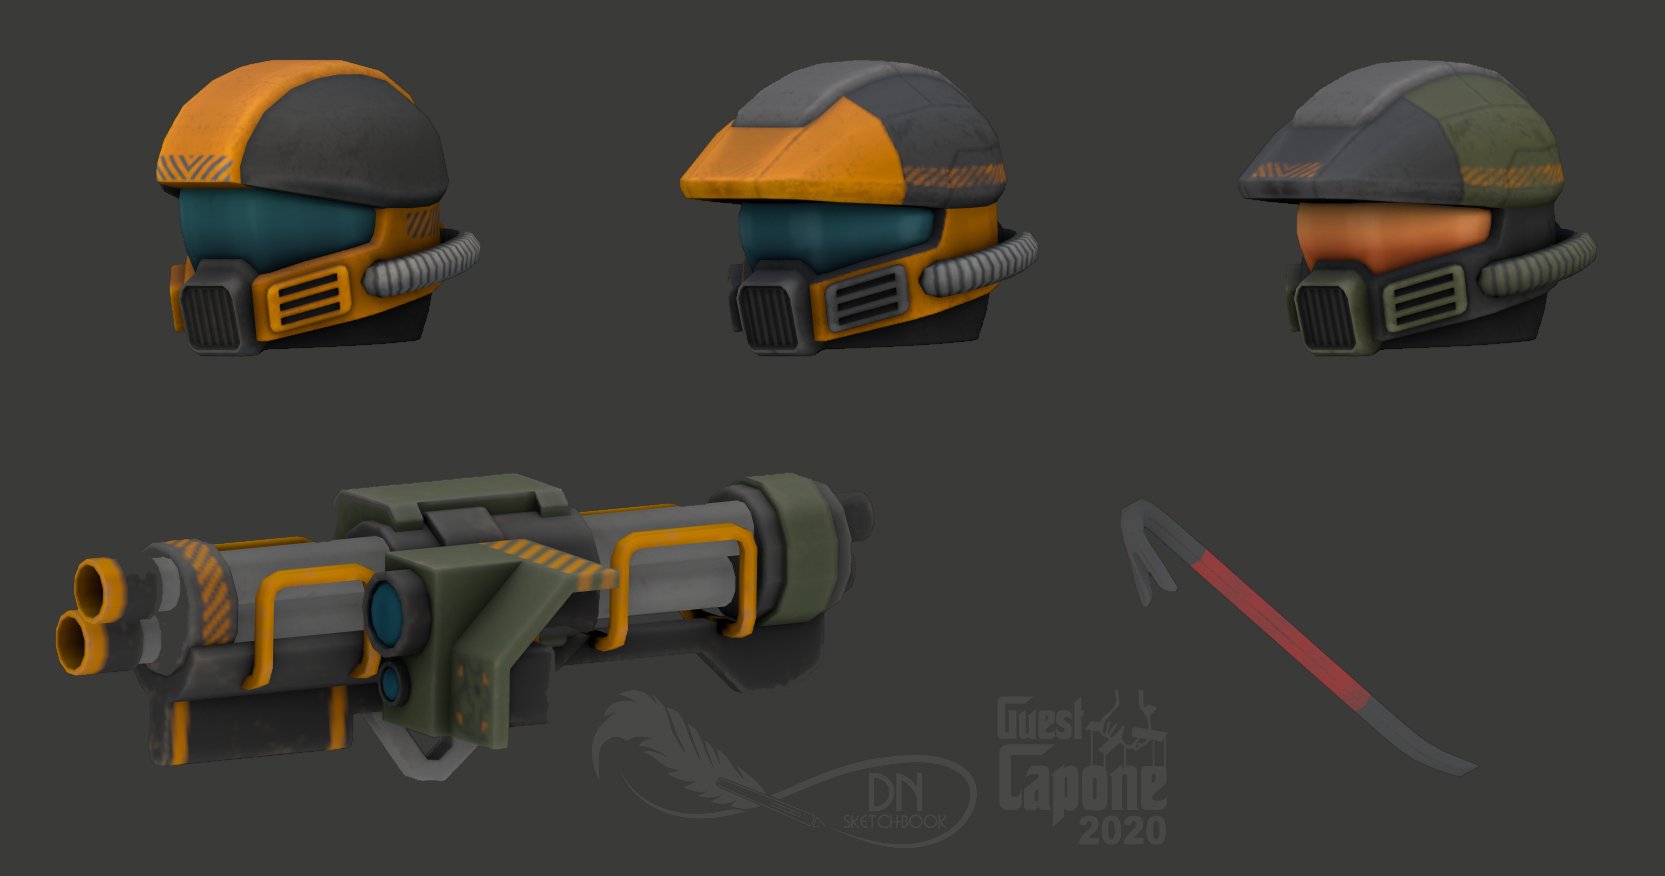 Guest Capone On Twitter Robloxdev Robloxugc Roblox Ugc Epic Items On The Catalog 4 This Week Crowbar Https T Co Zaow5mmitg Rad Suppress Helmet Https T Co 0xb5xtrzzm Hod Helmet Https T Co Gmy2q8ydzq Juggernaut Helmet Https T Co - how to make a helmet in roblox